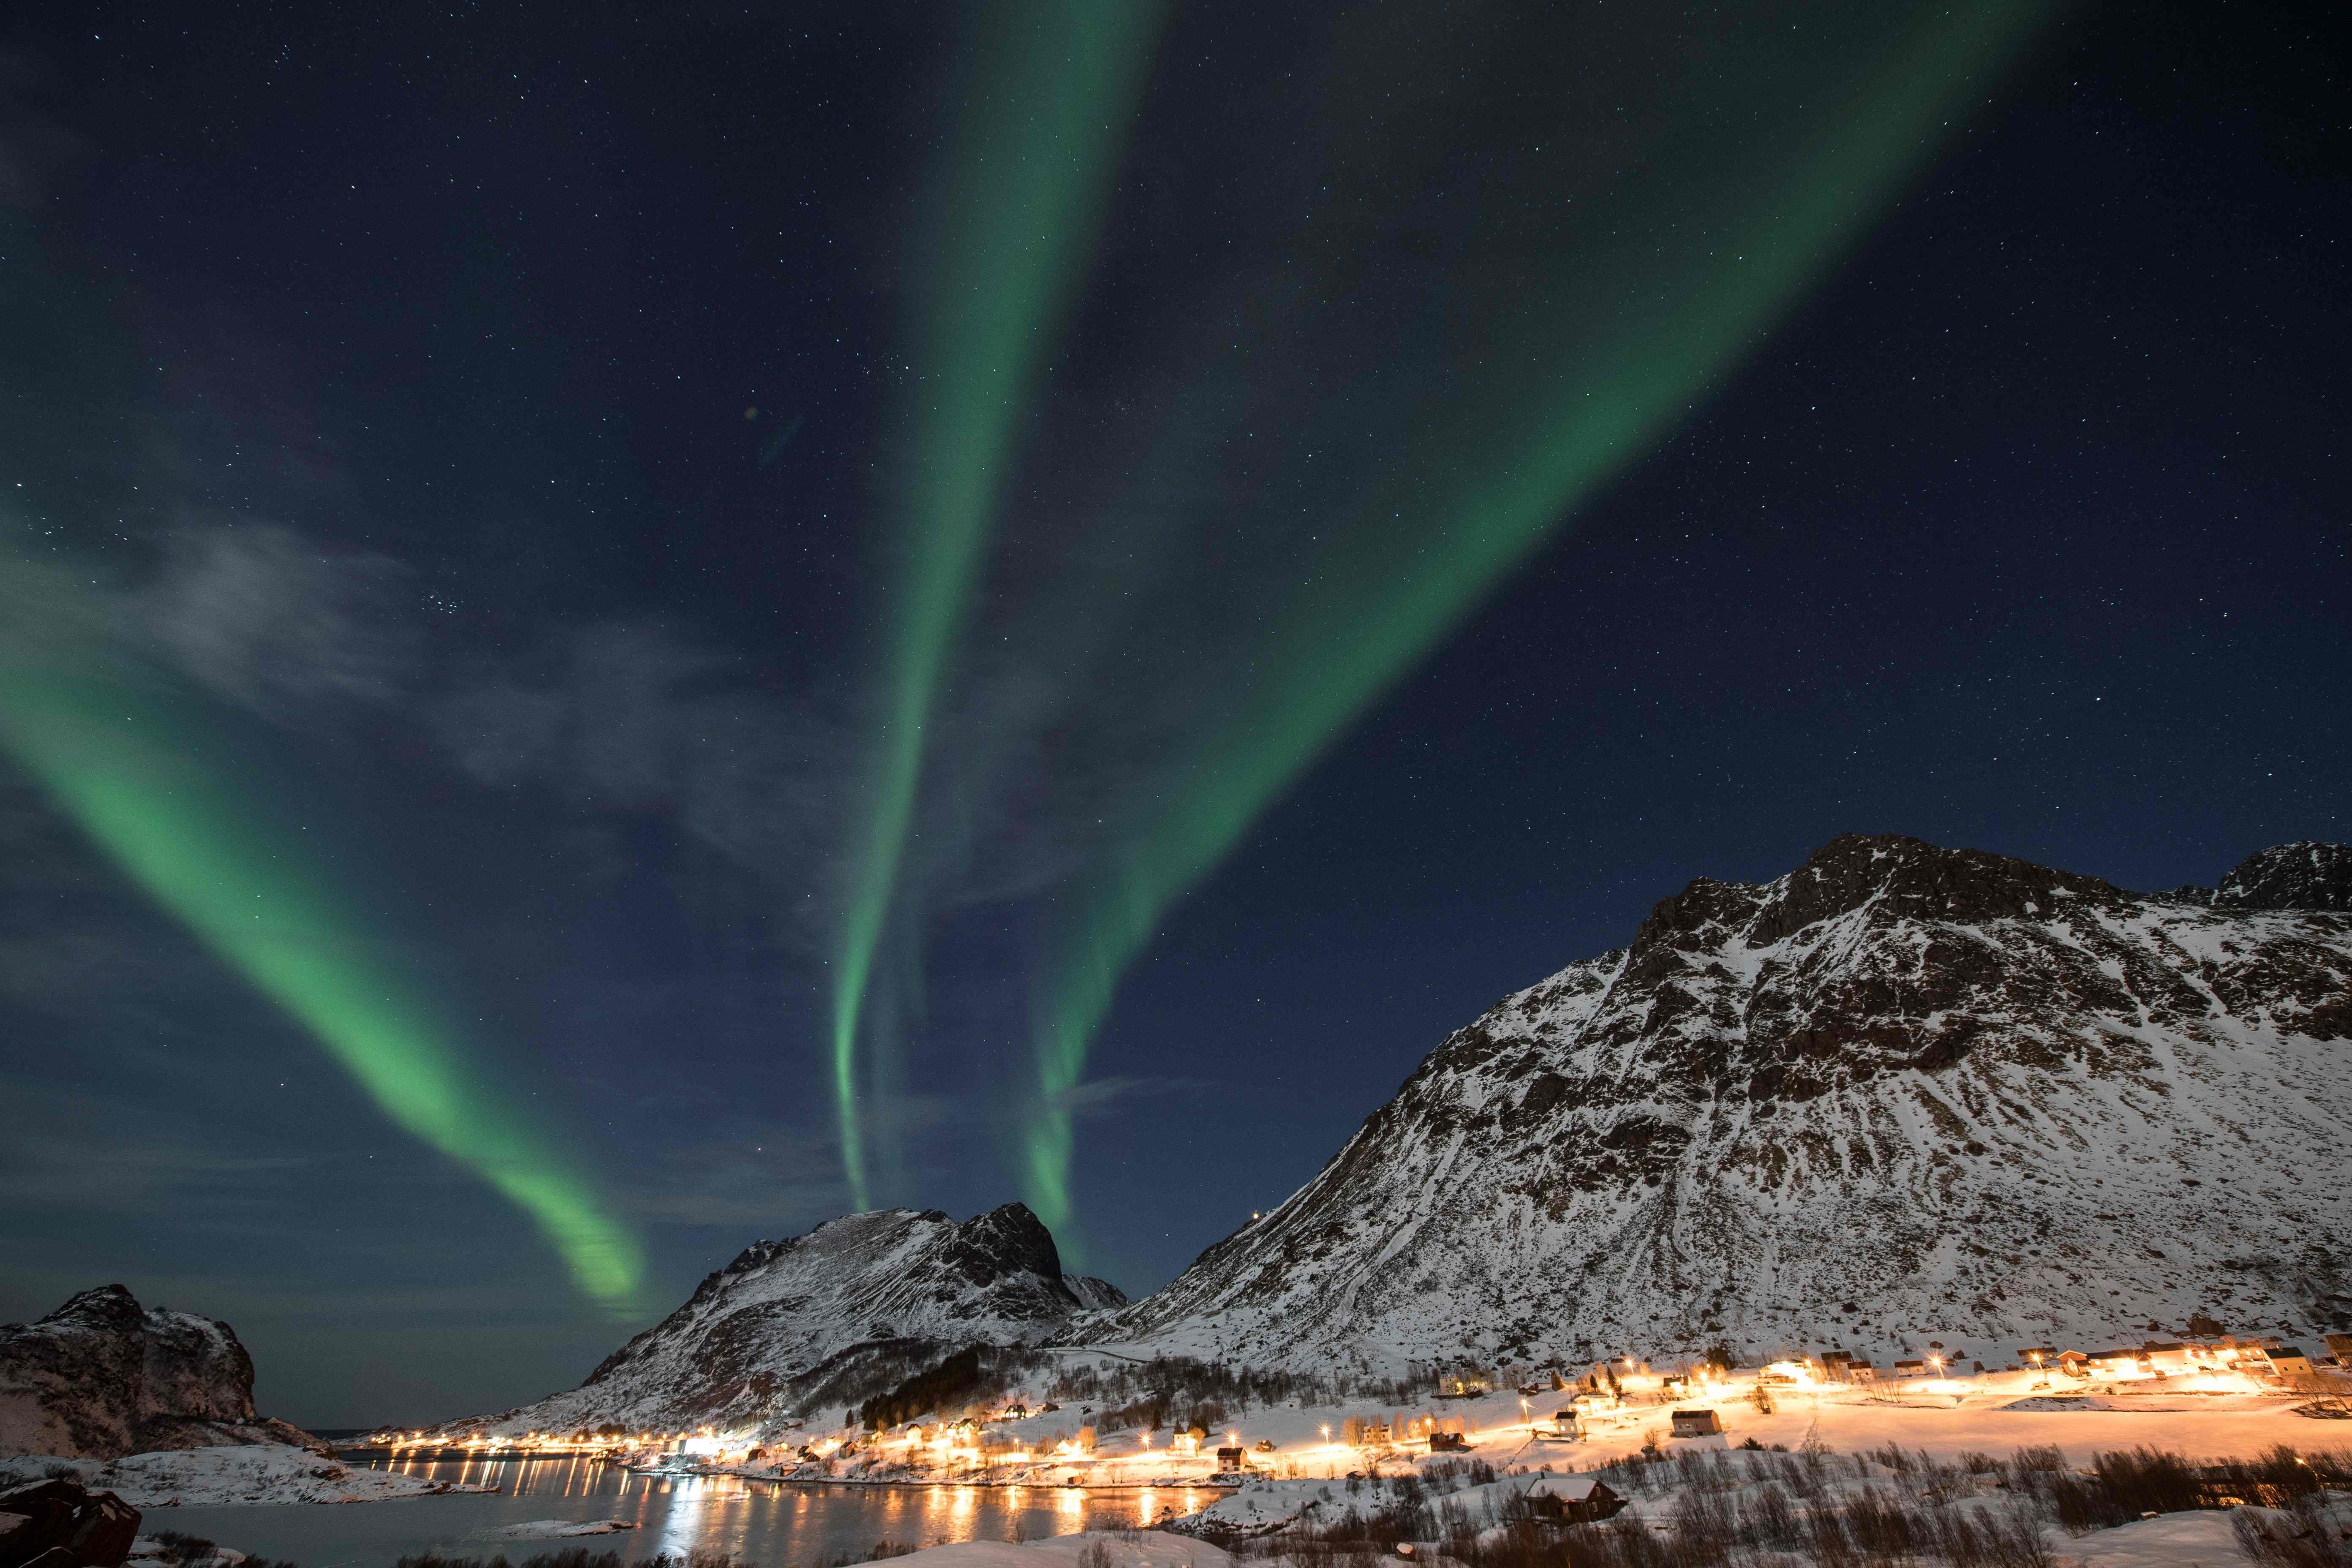 The “Northern Lights”, also known as “Aurora borealis” flash across the sky above Unstad in Norway, a town know for being the world's most northern Arctic surf school. AFP